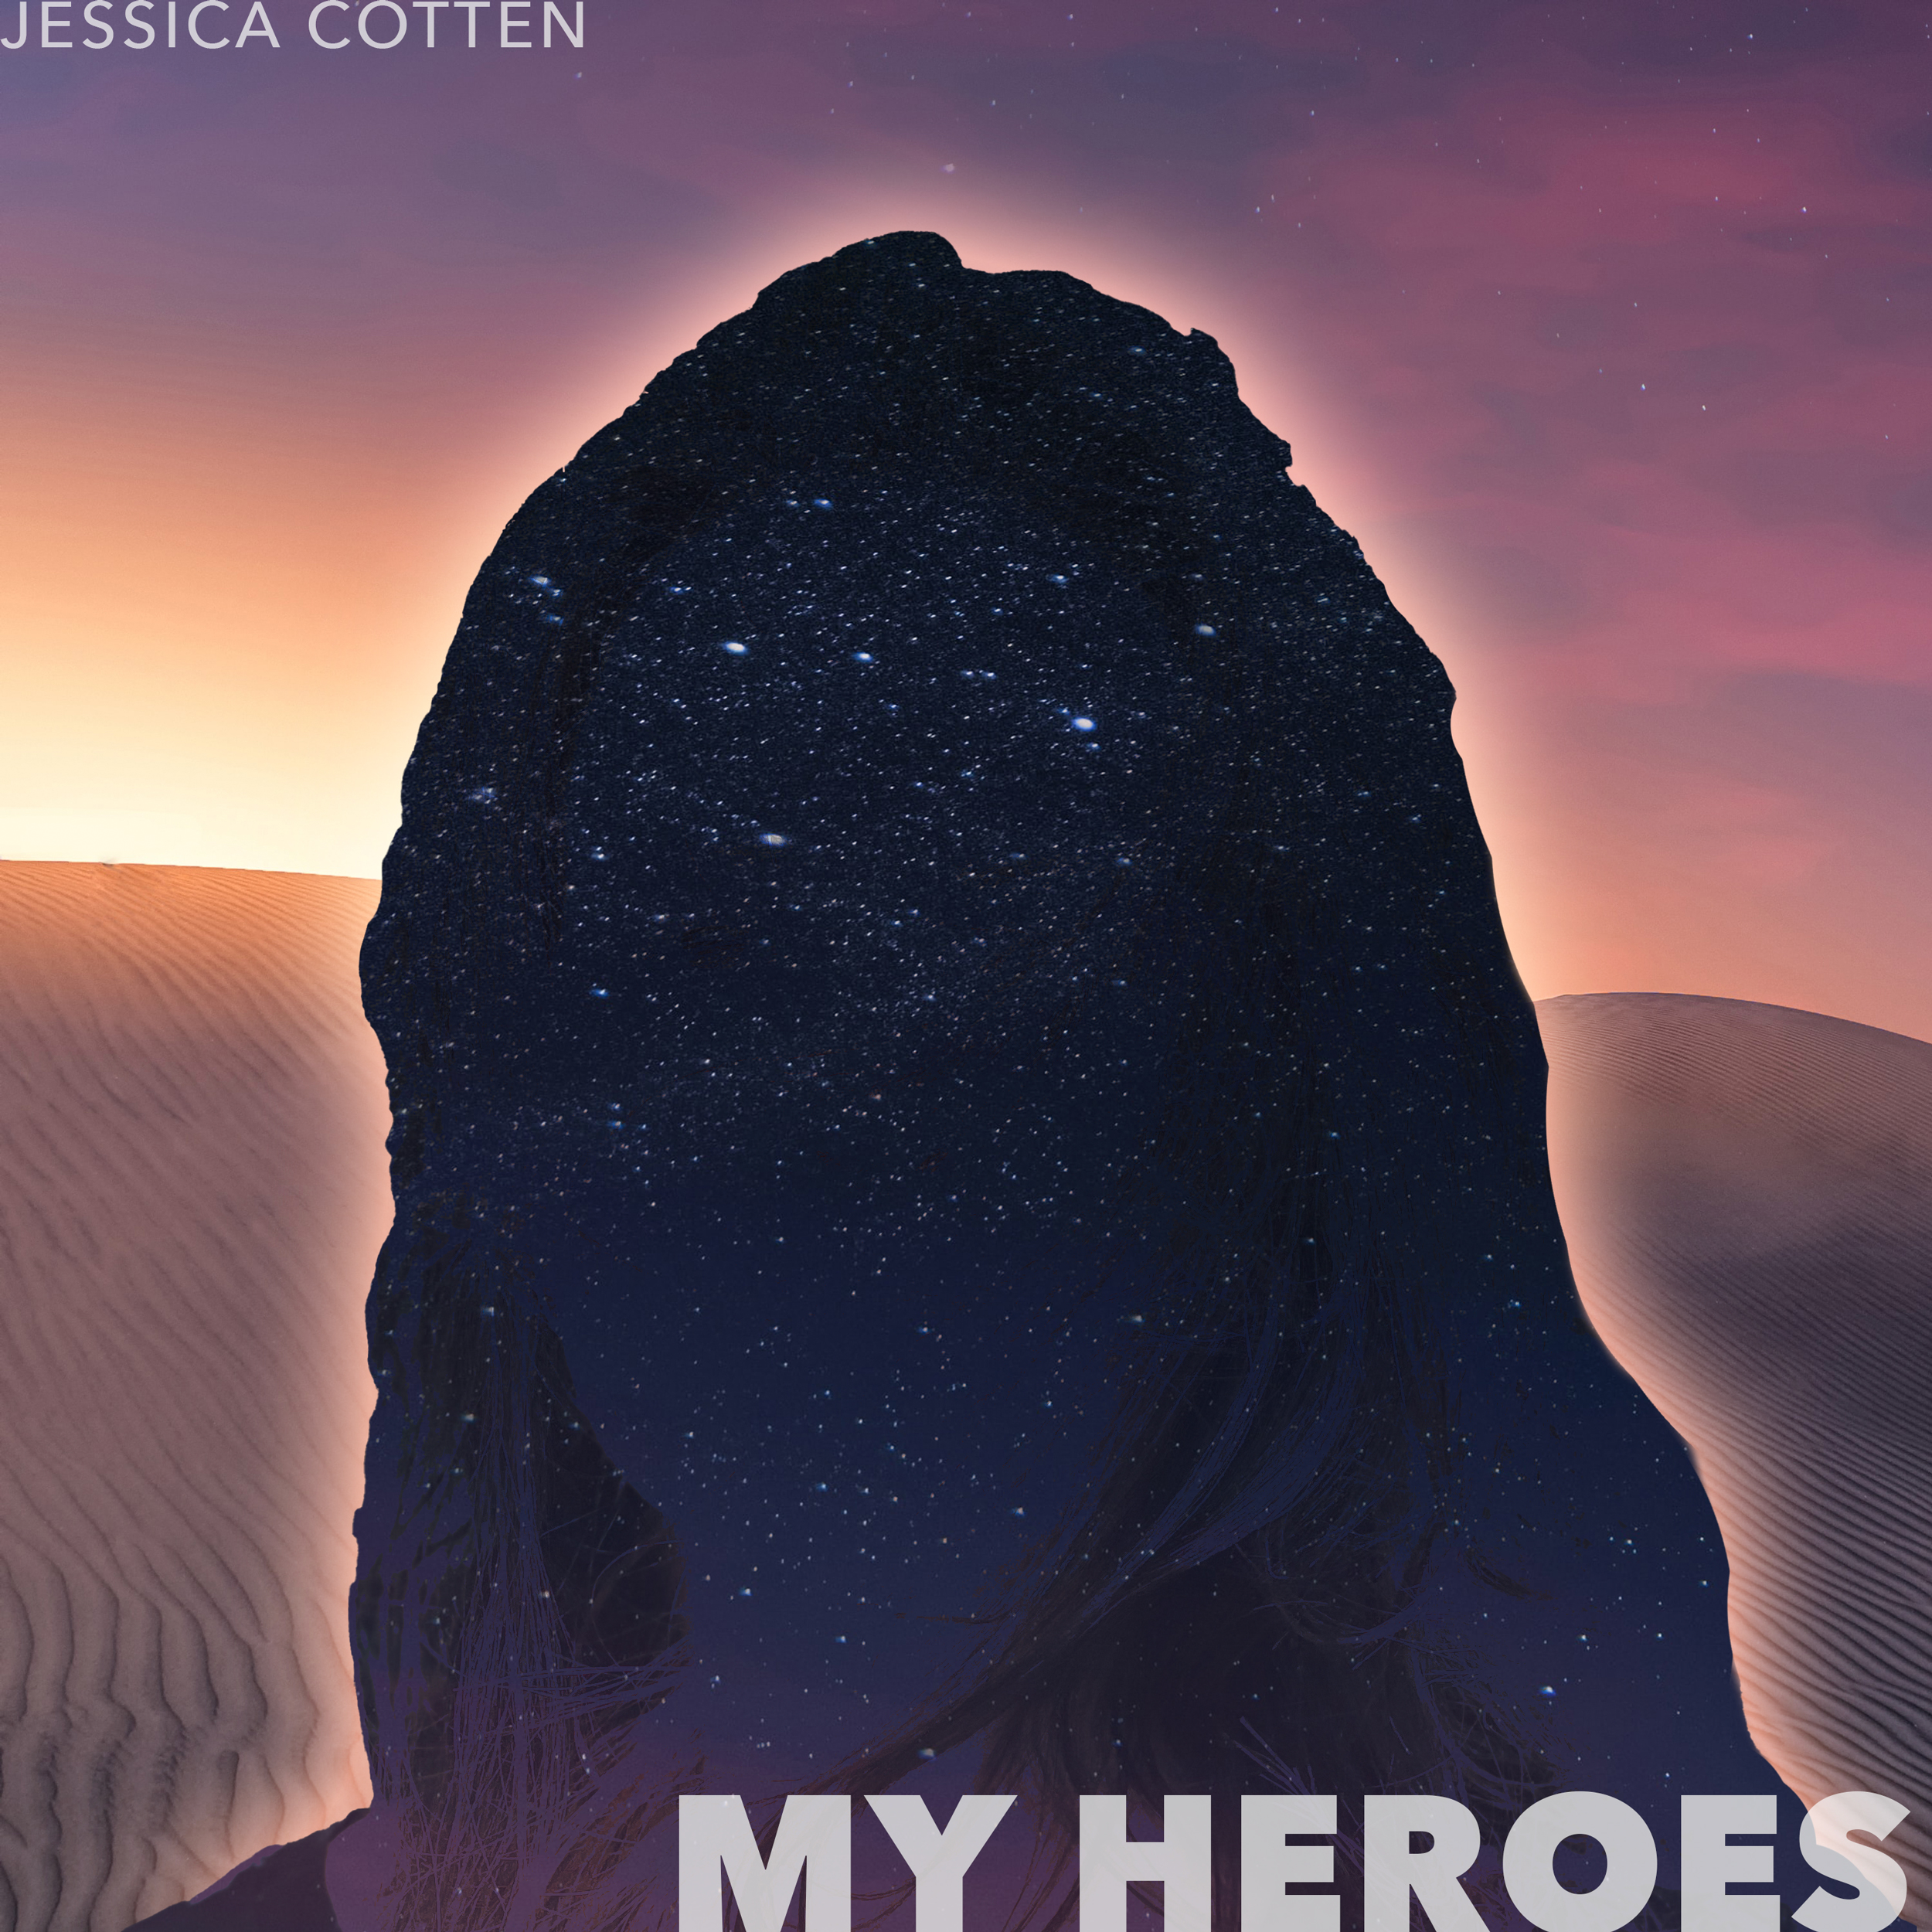 New synth pop synthwave single - cover image of Jessica Cotten's song My Heroes